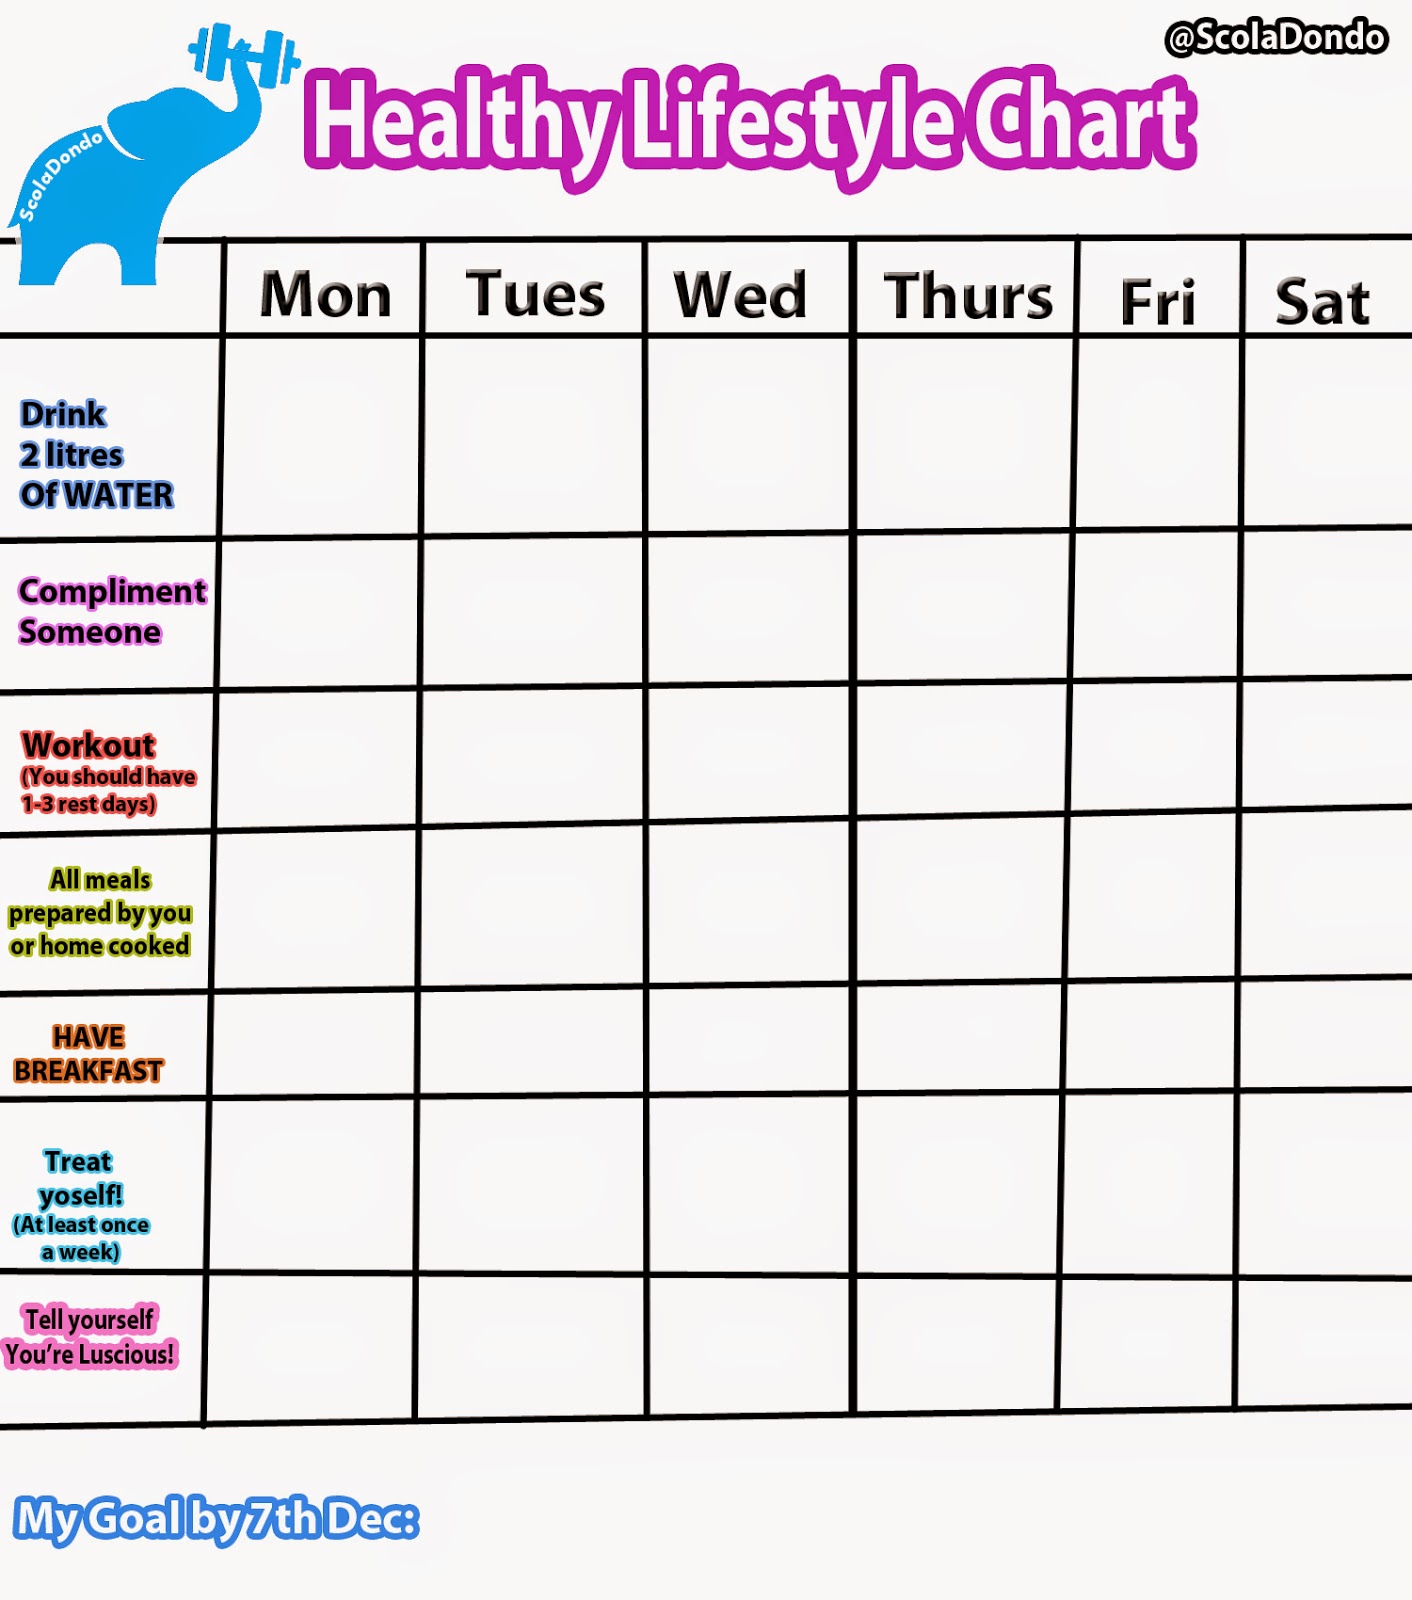 Healthy Lifestyle Chart Challenge | That Fitness Life by ...